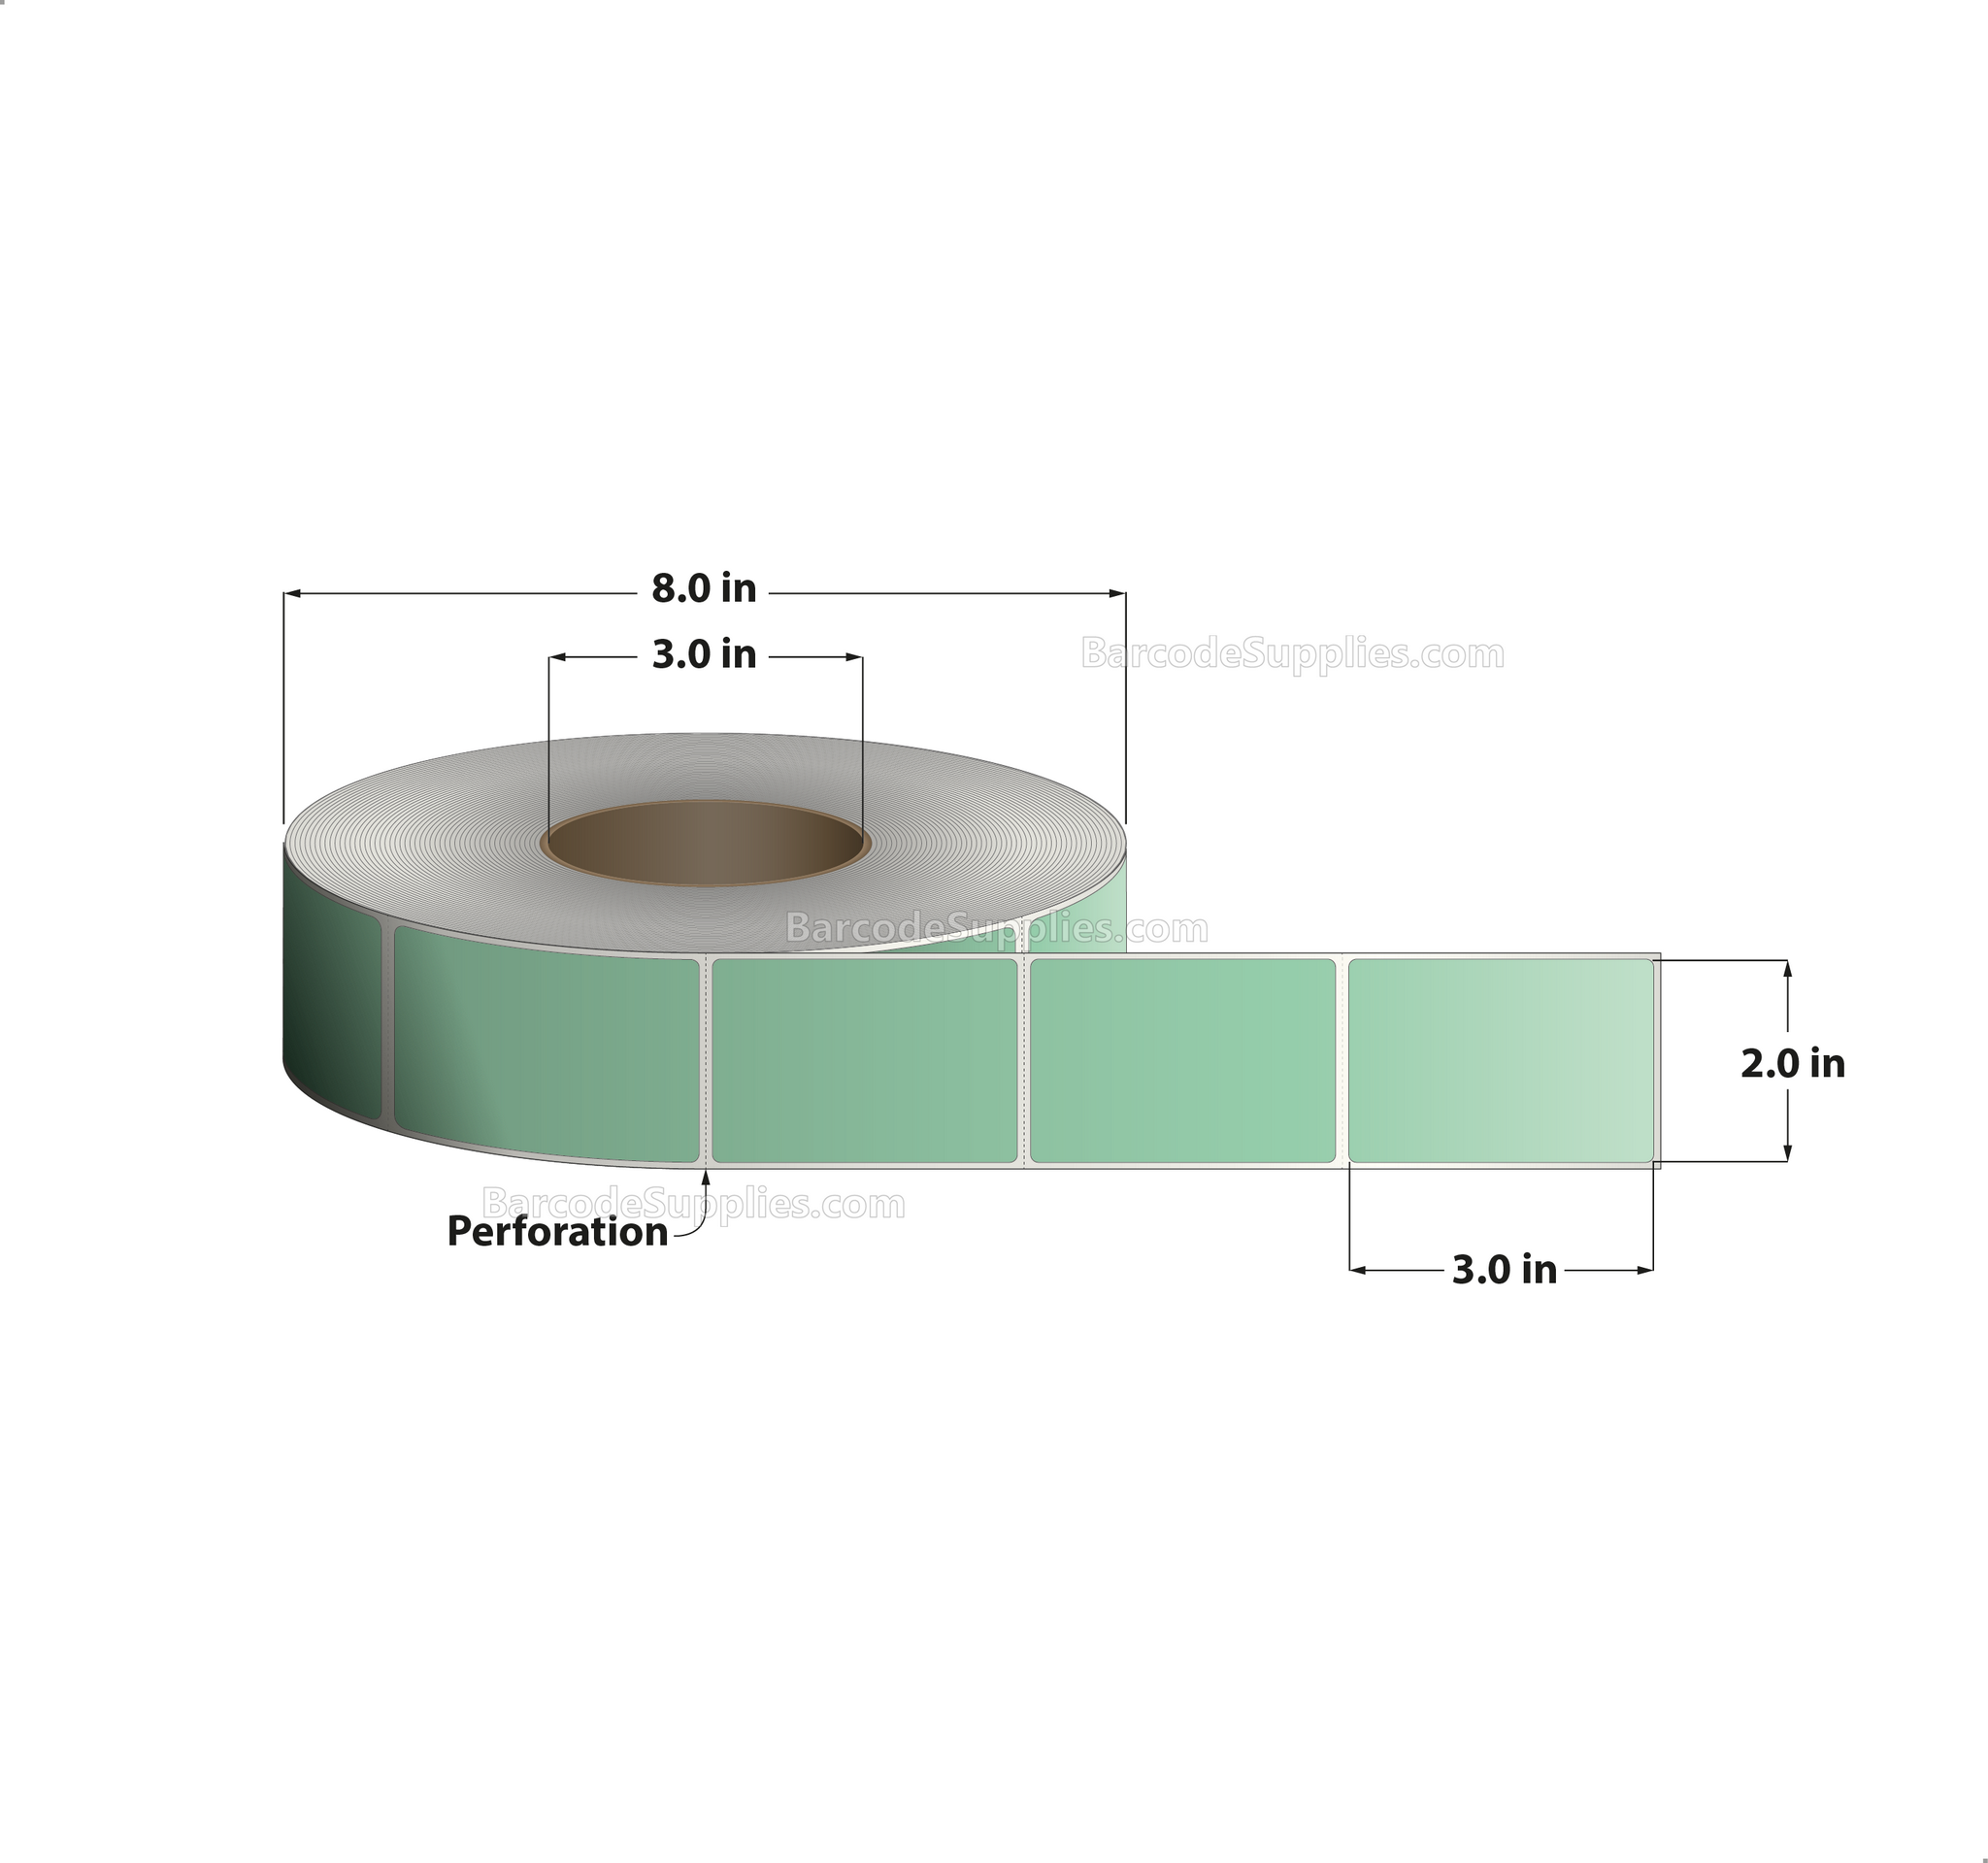 2 x 3 Thermal Transfer 345 Green Labels With Permanent Adhesive - Perforated - 1900 Labels Per Roll - Carton Of 8 Rolls - 15200 Labels Total - MPN: RFC-2-3-1900-GR